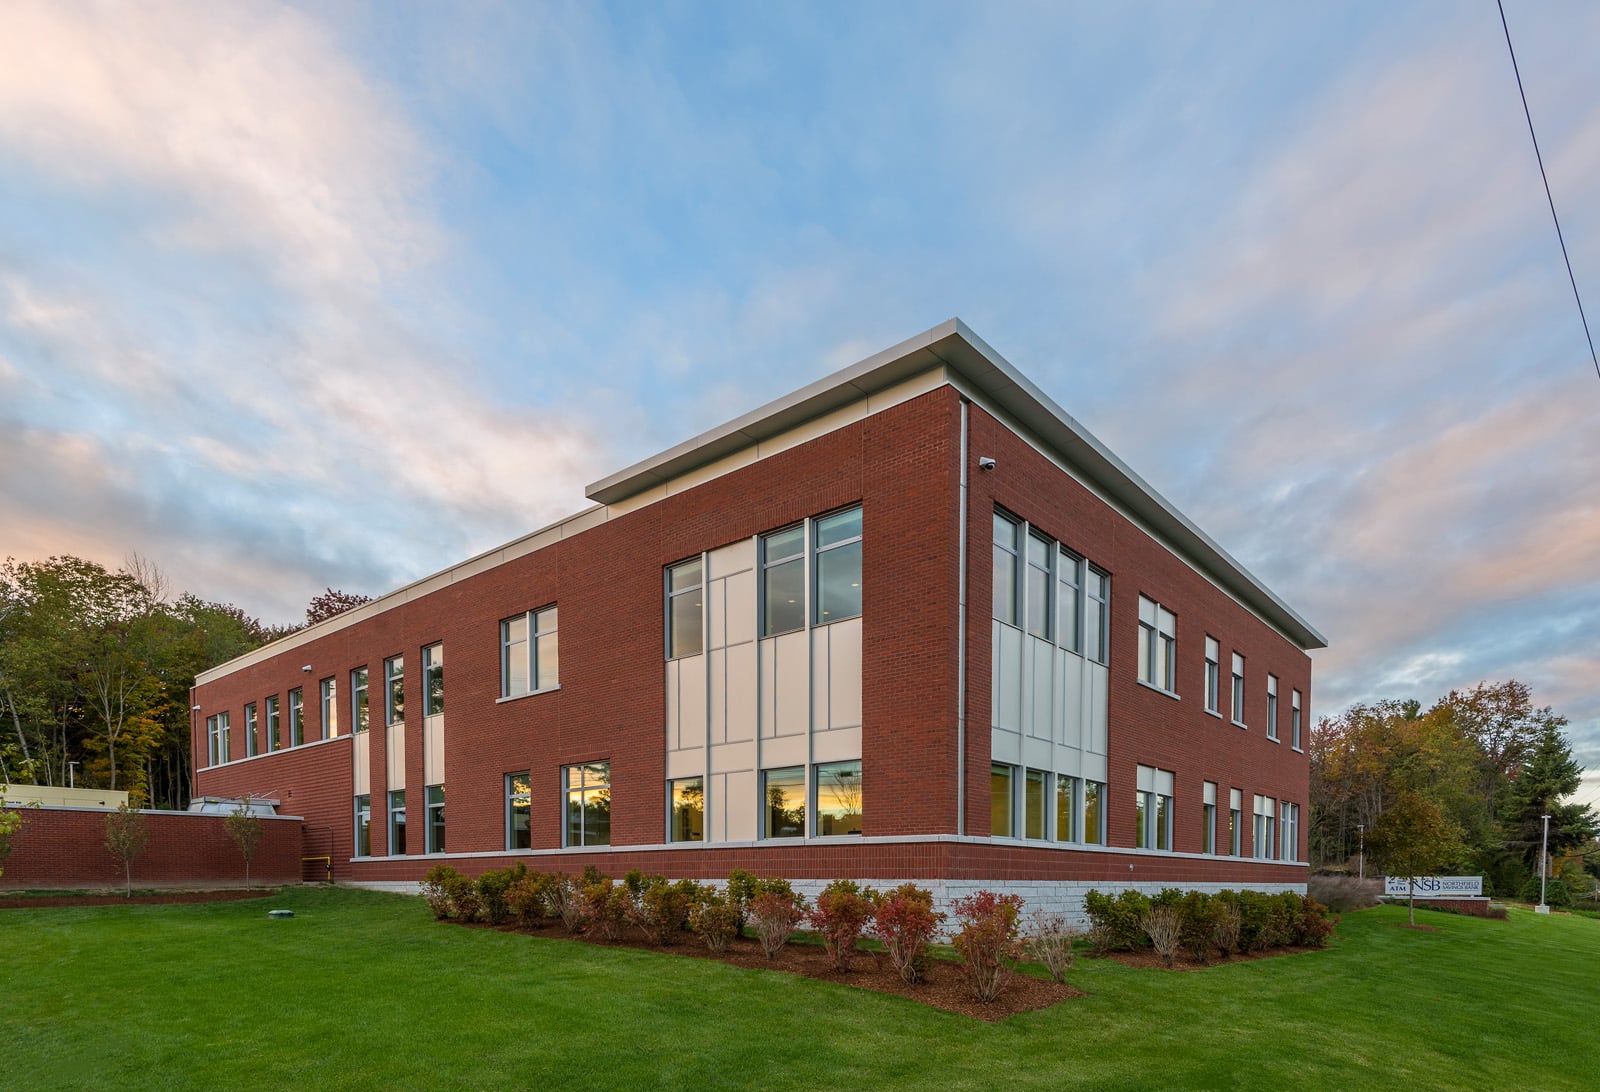 NSB Operations Center - Vermont Architects